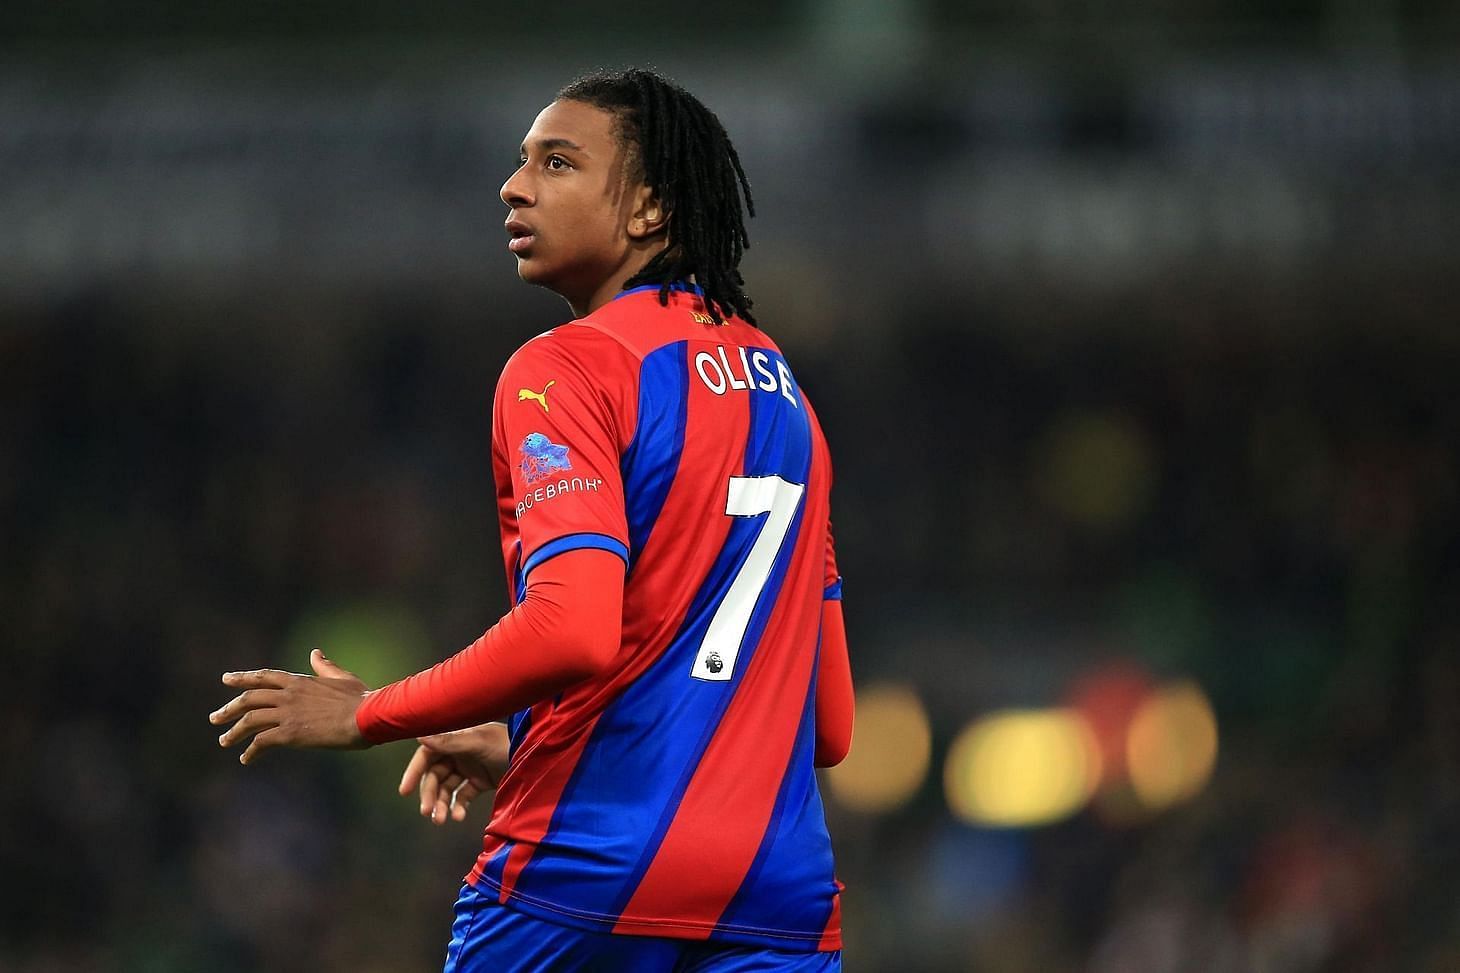 Olise has developed into a promising player at Crystal Palace.